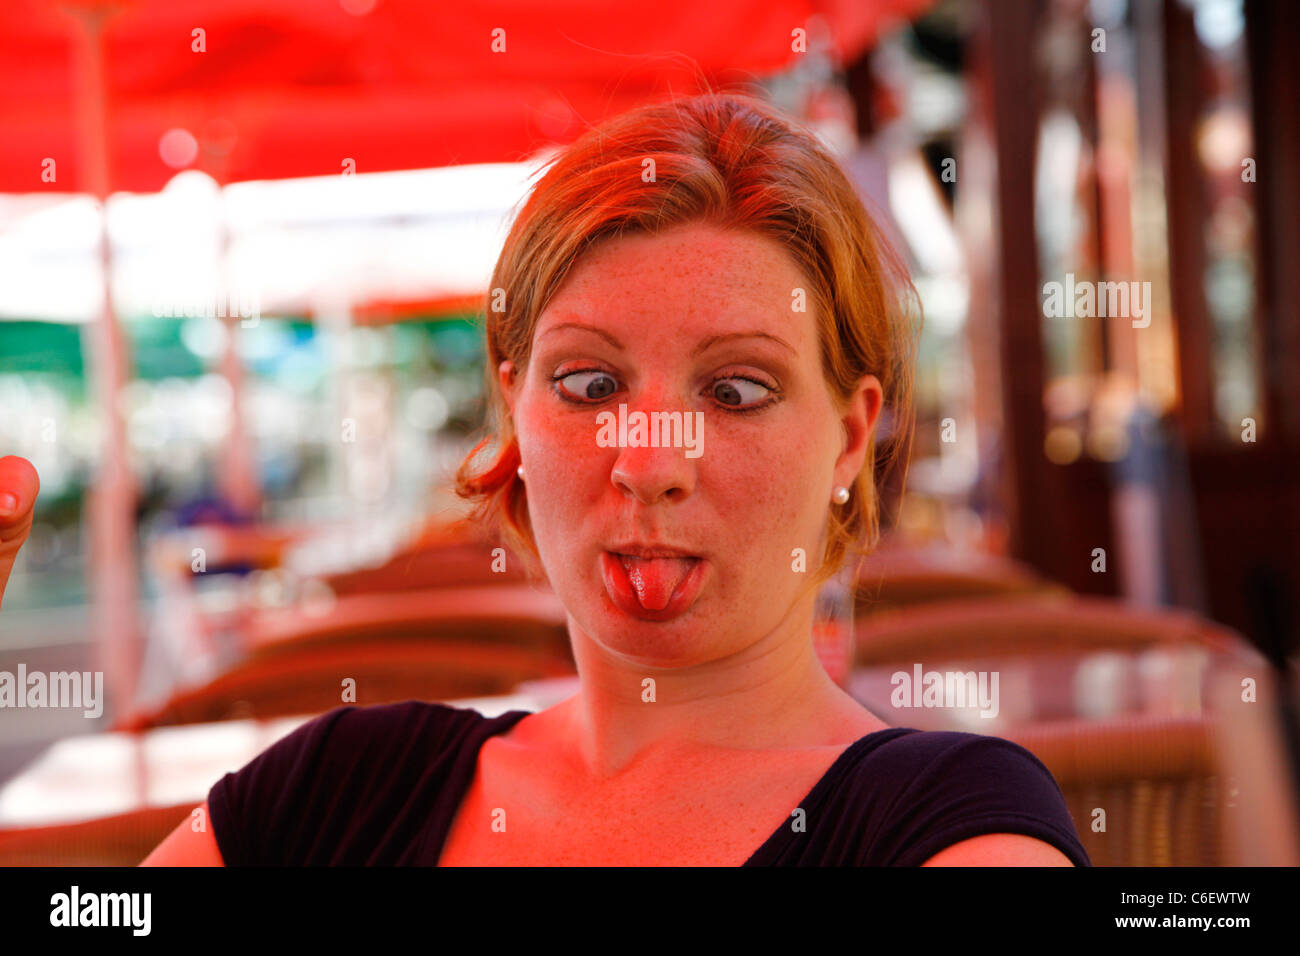 Woman pulling tongue out with eyes crossed Stock Photo